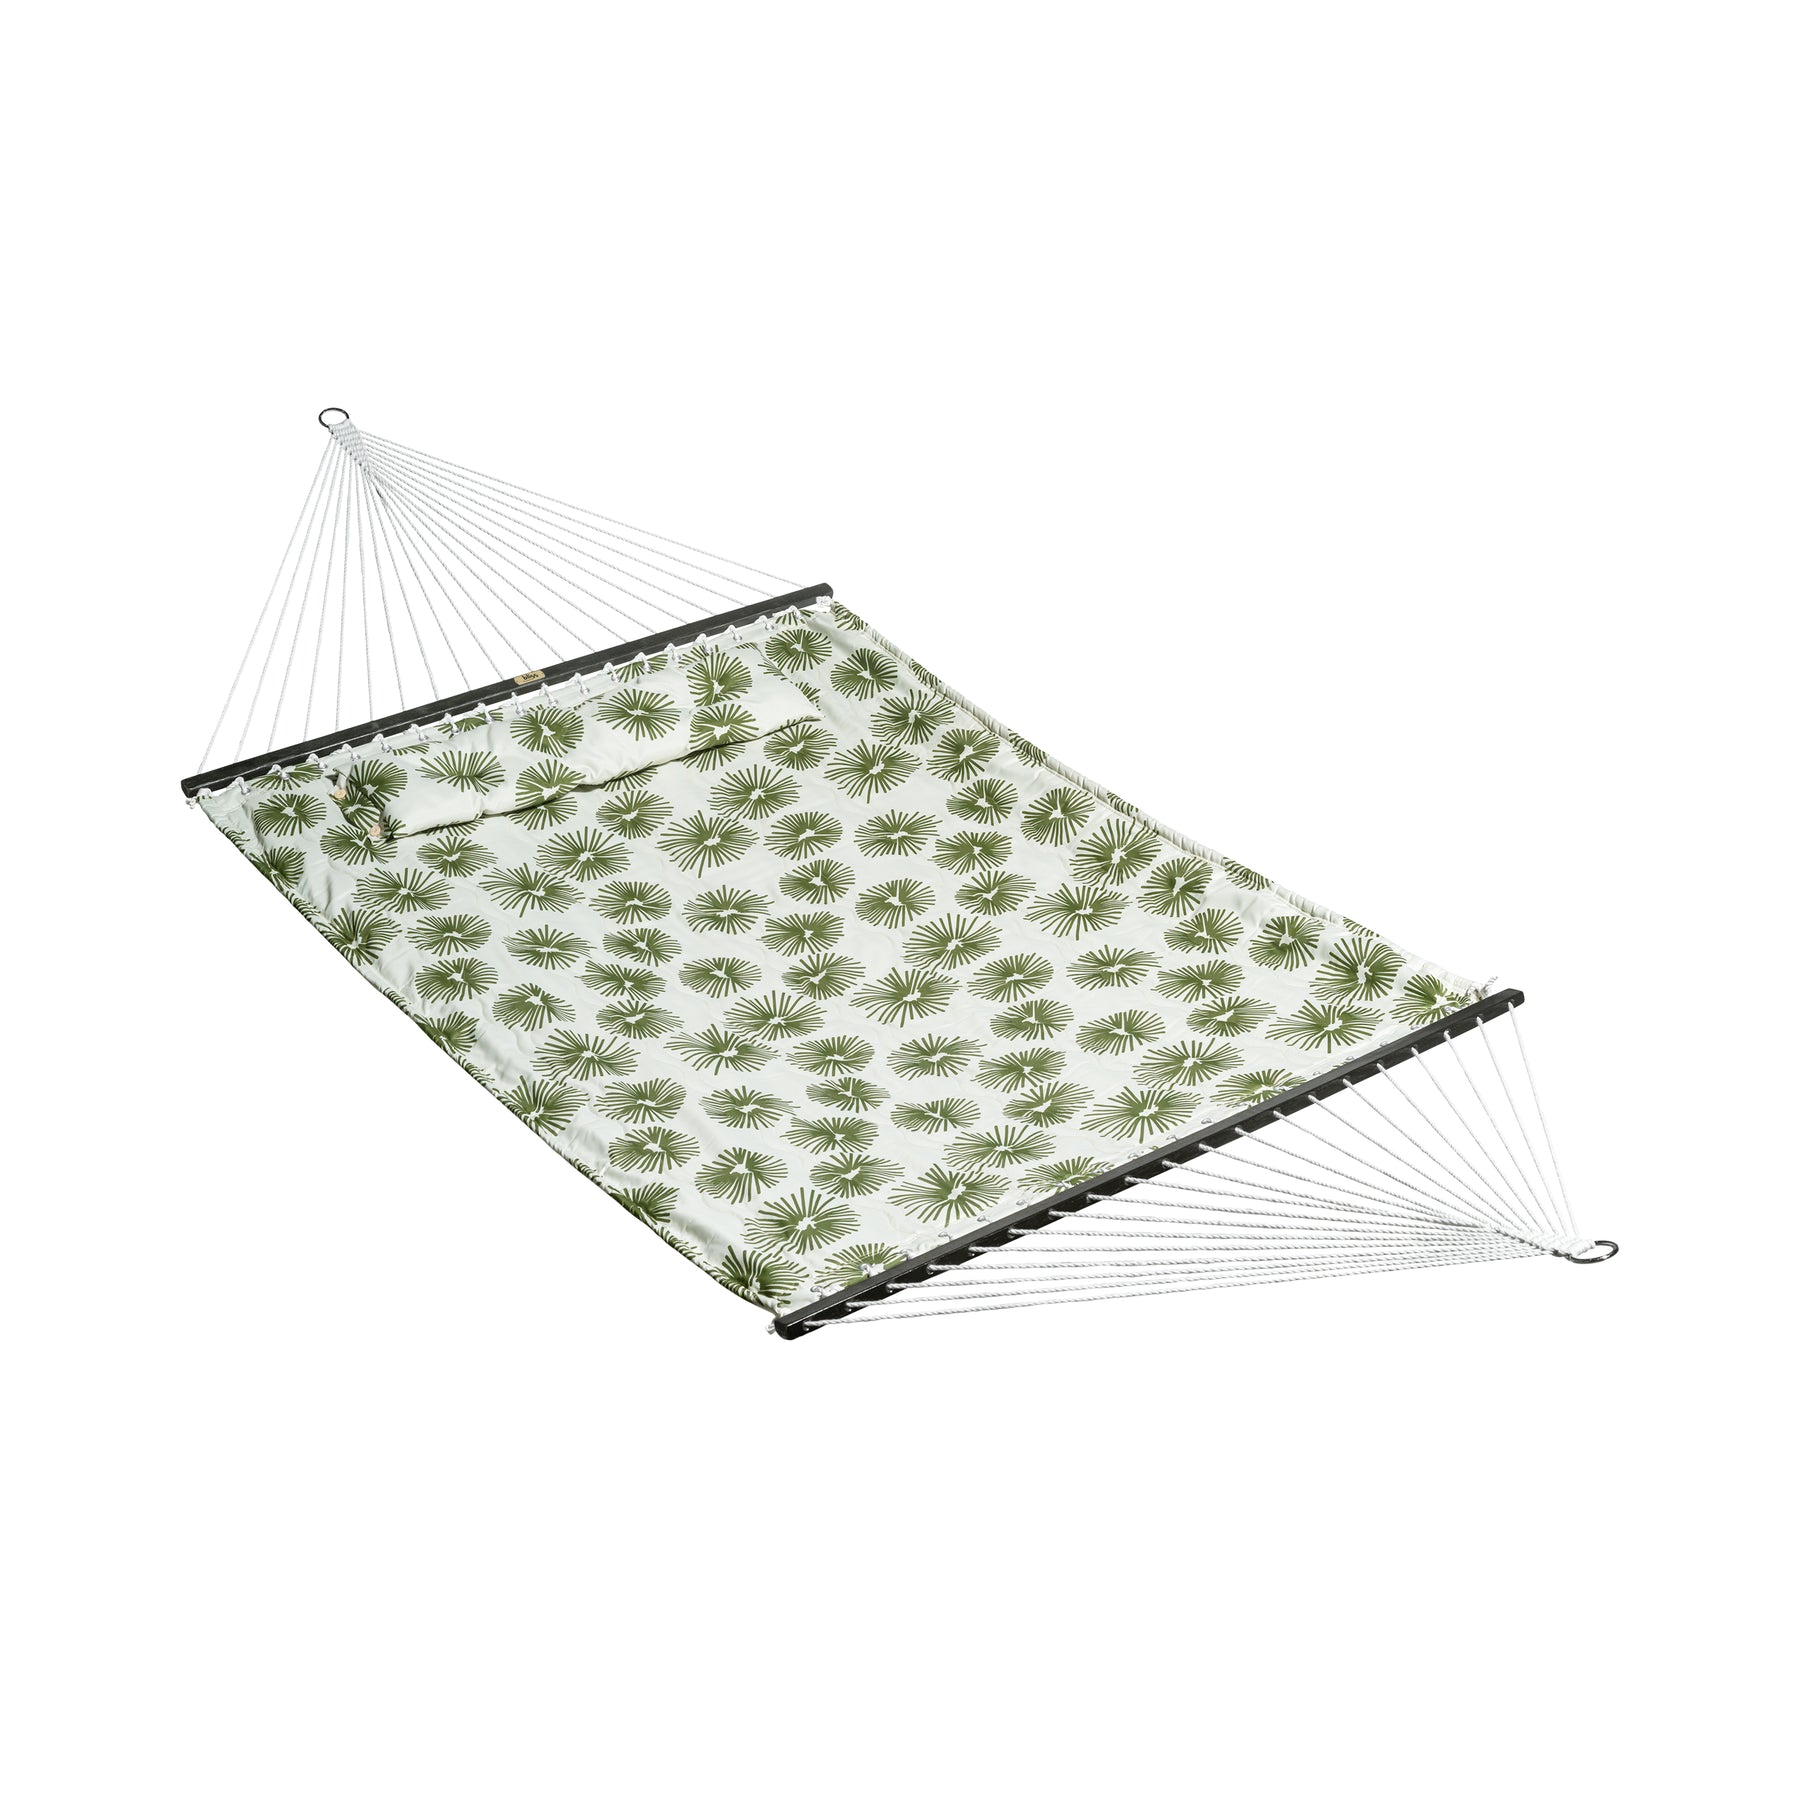 Bliss Hammocks 55-inch Wide 2-Person Reversible Quilted Hammock with Spreader Bars and Pillow in the green burst variation.